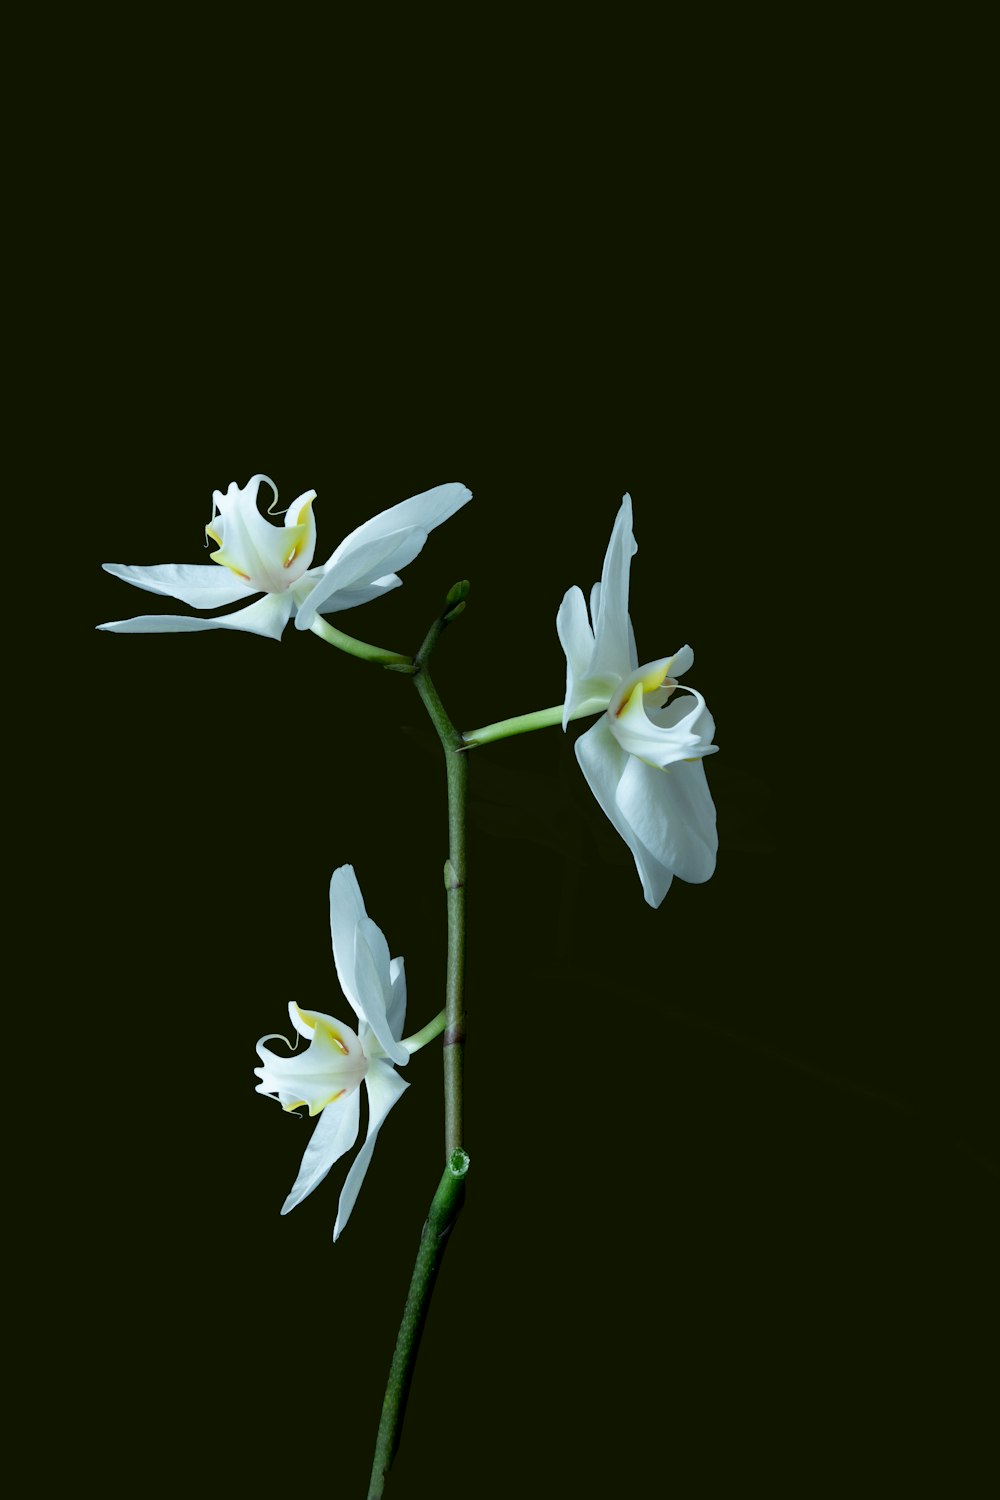 a single white flower on a stem against a black background